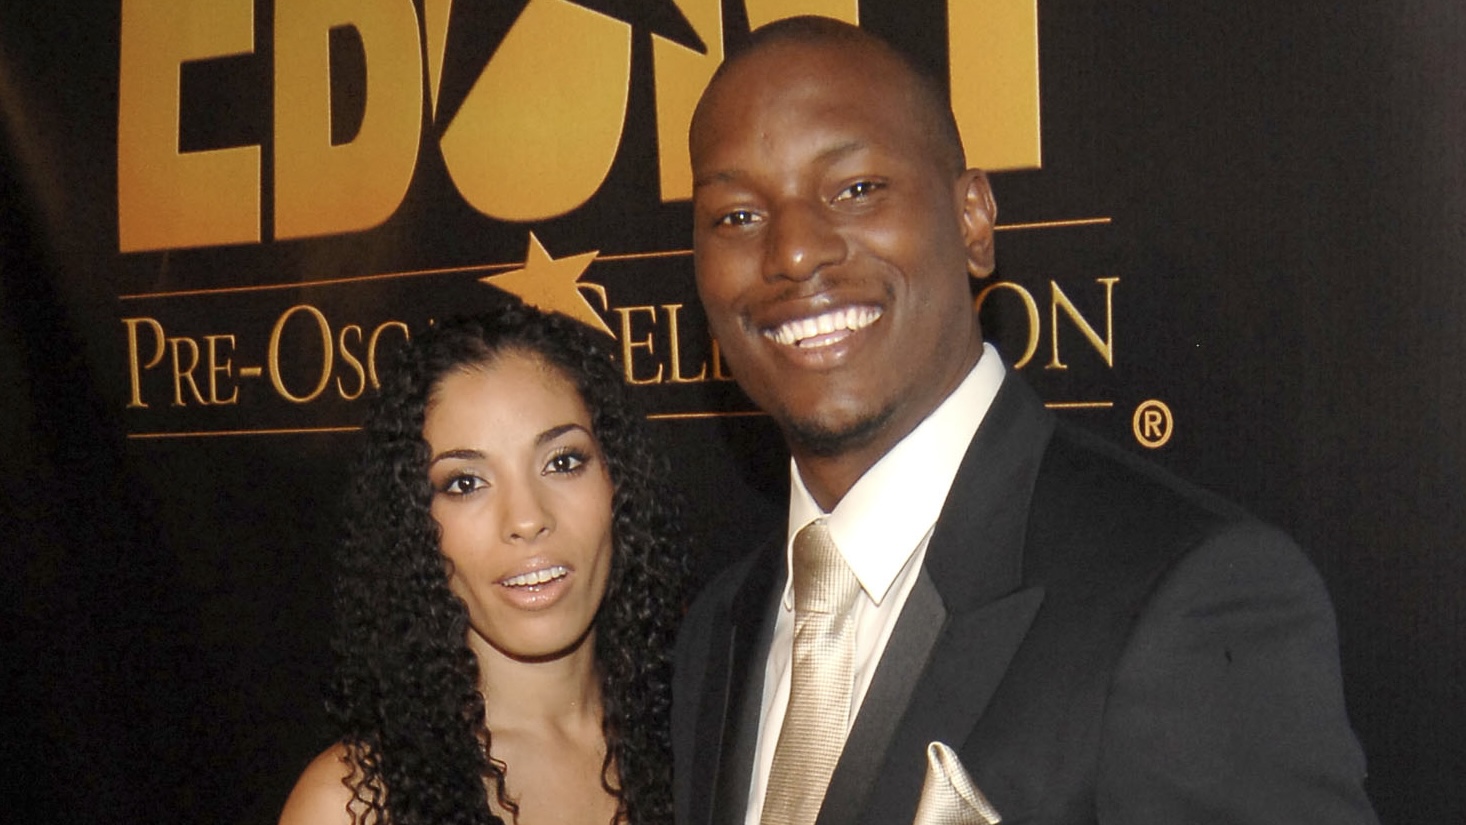 Tyrese’s Ex-Wife Norma Mitchell Is Reportedly Seeking A Restraining Order Against Him